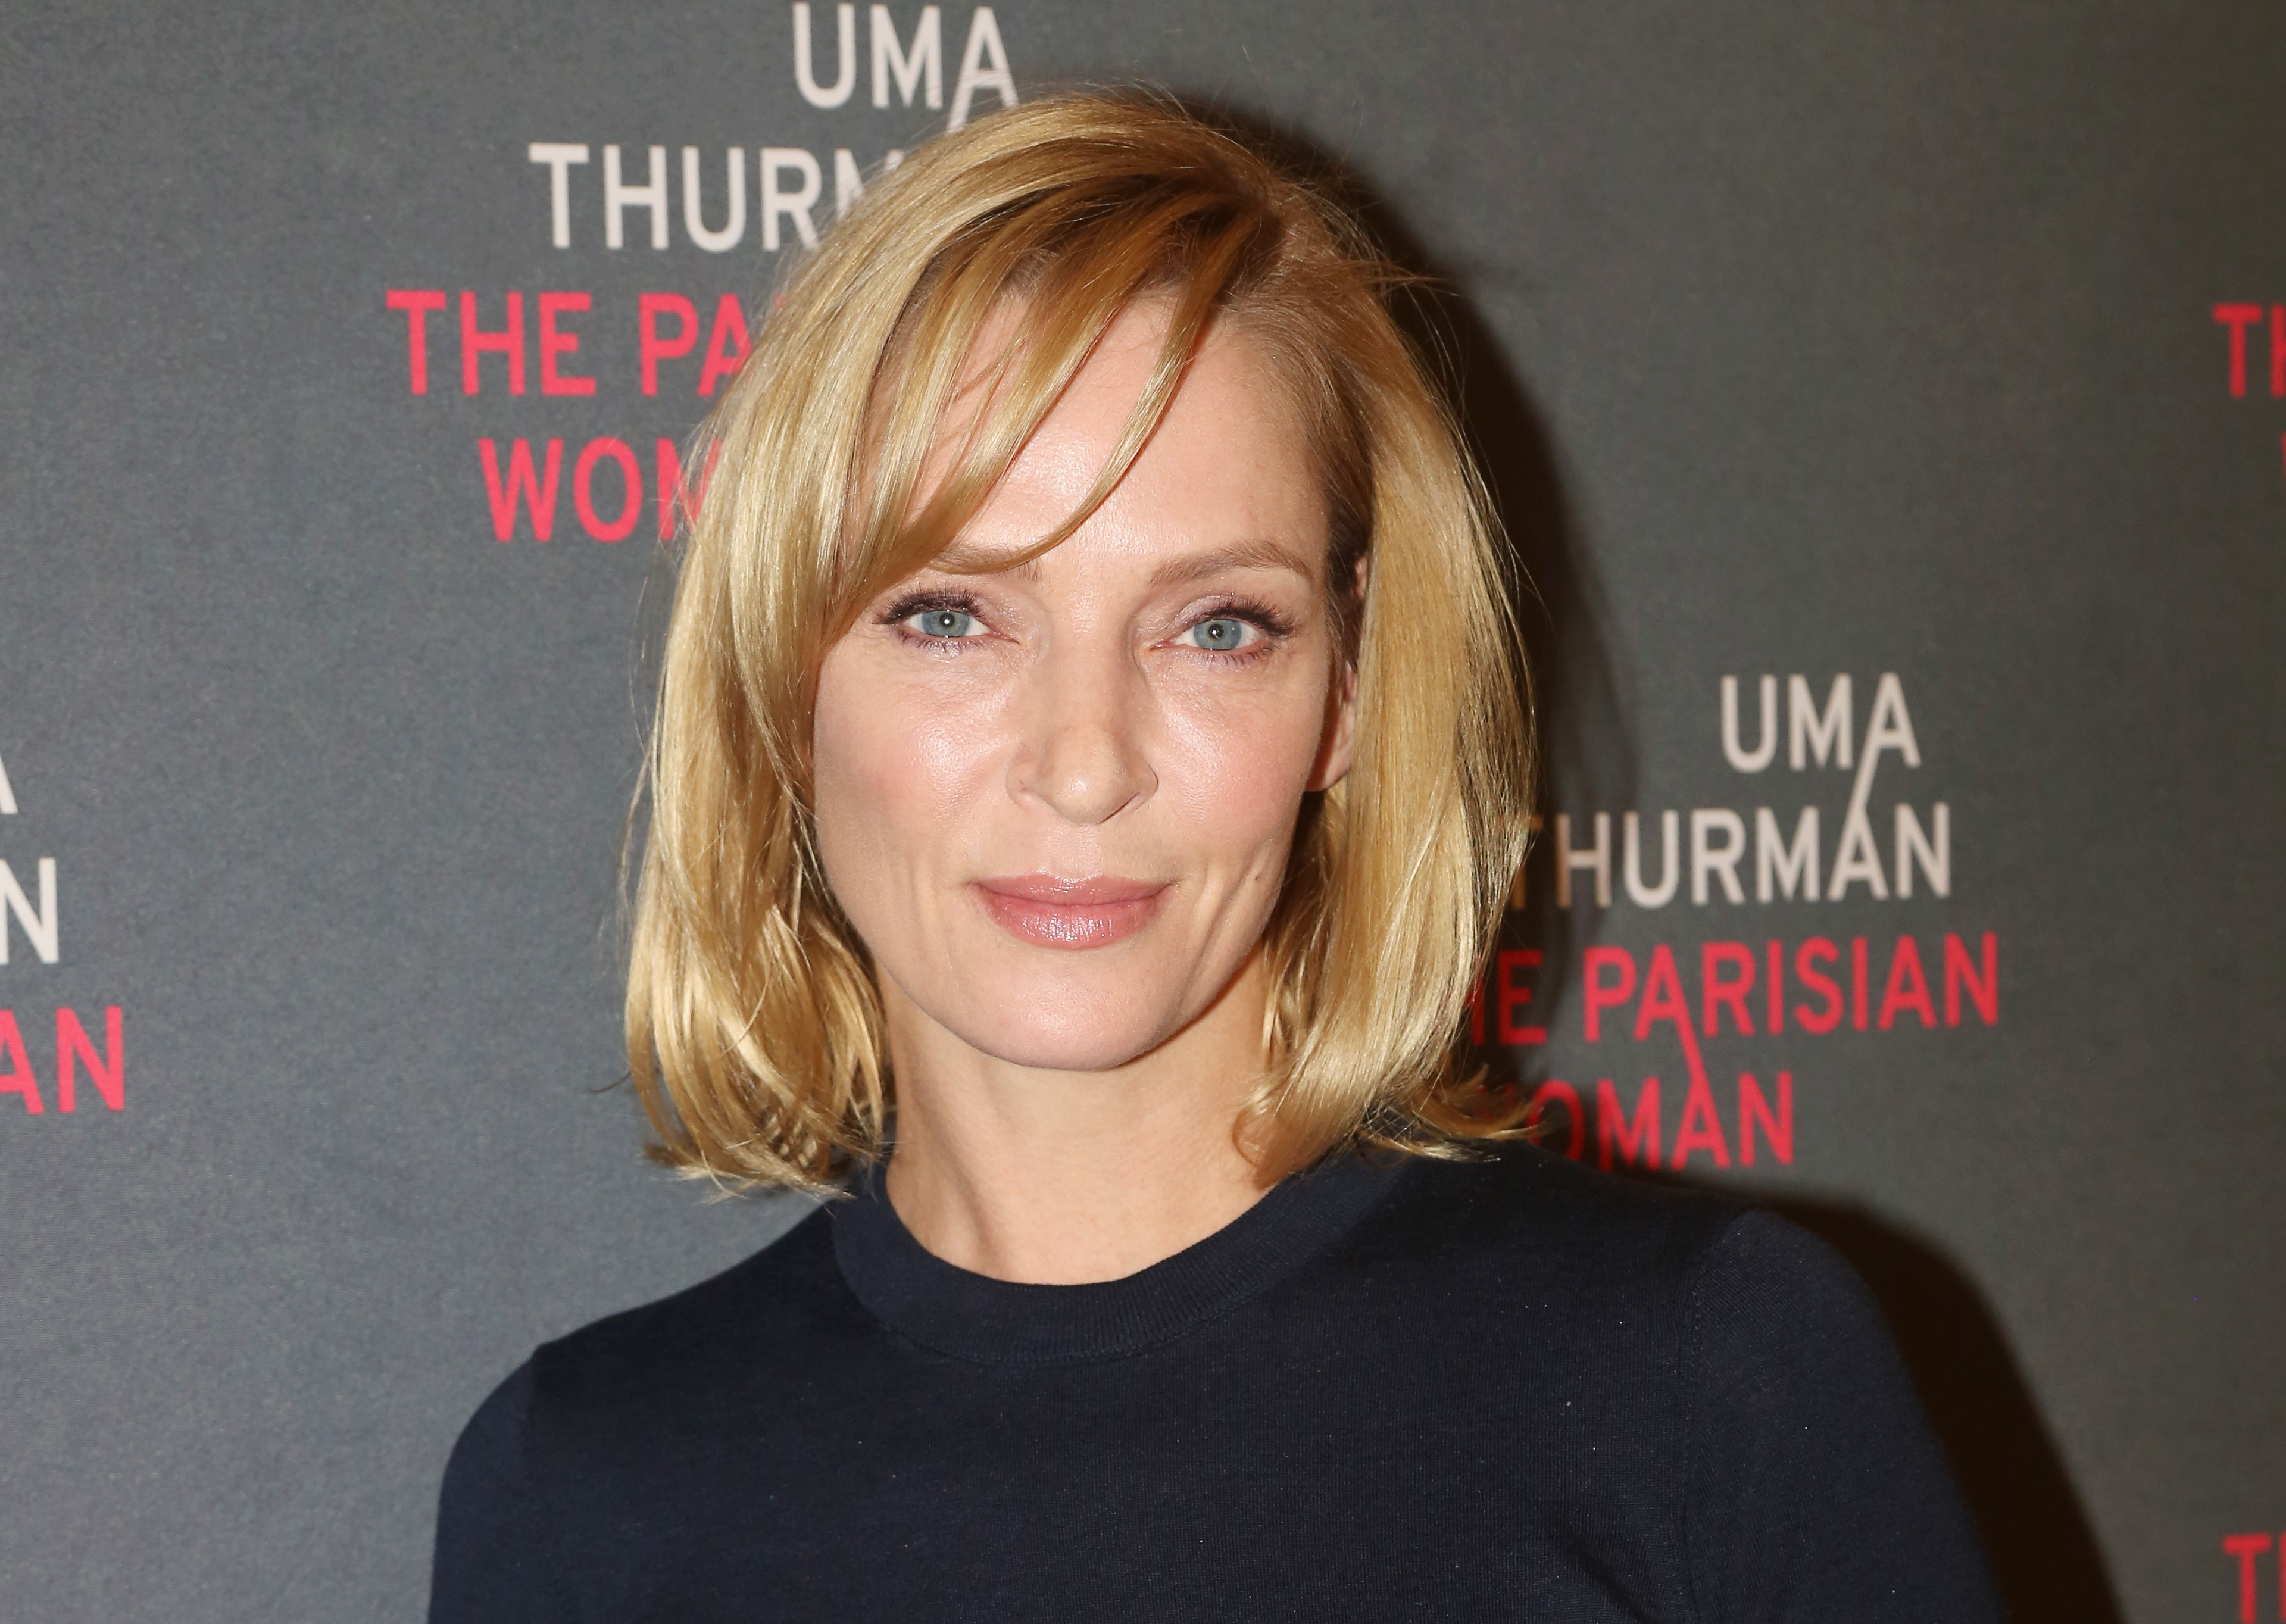 Uma Thurman at a press meet &amp; greet for her new broadway play "The Parisian Woman" at The New 42nd Street Studios on Oct. 18, 2017 in New York City.  ( (Bruce Glikas—FilmMagic/Getty Images)